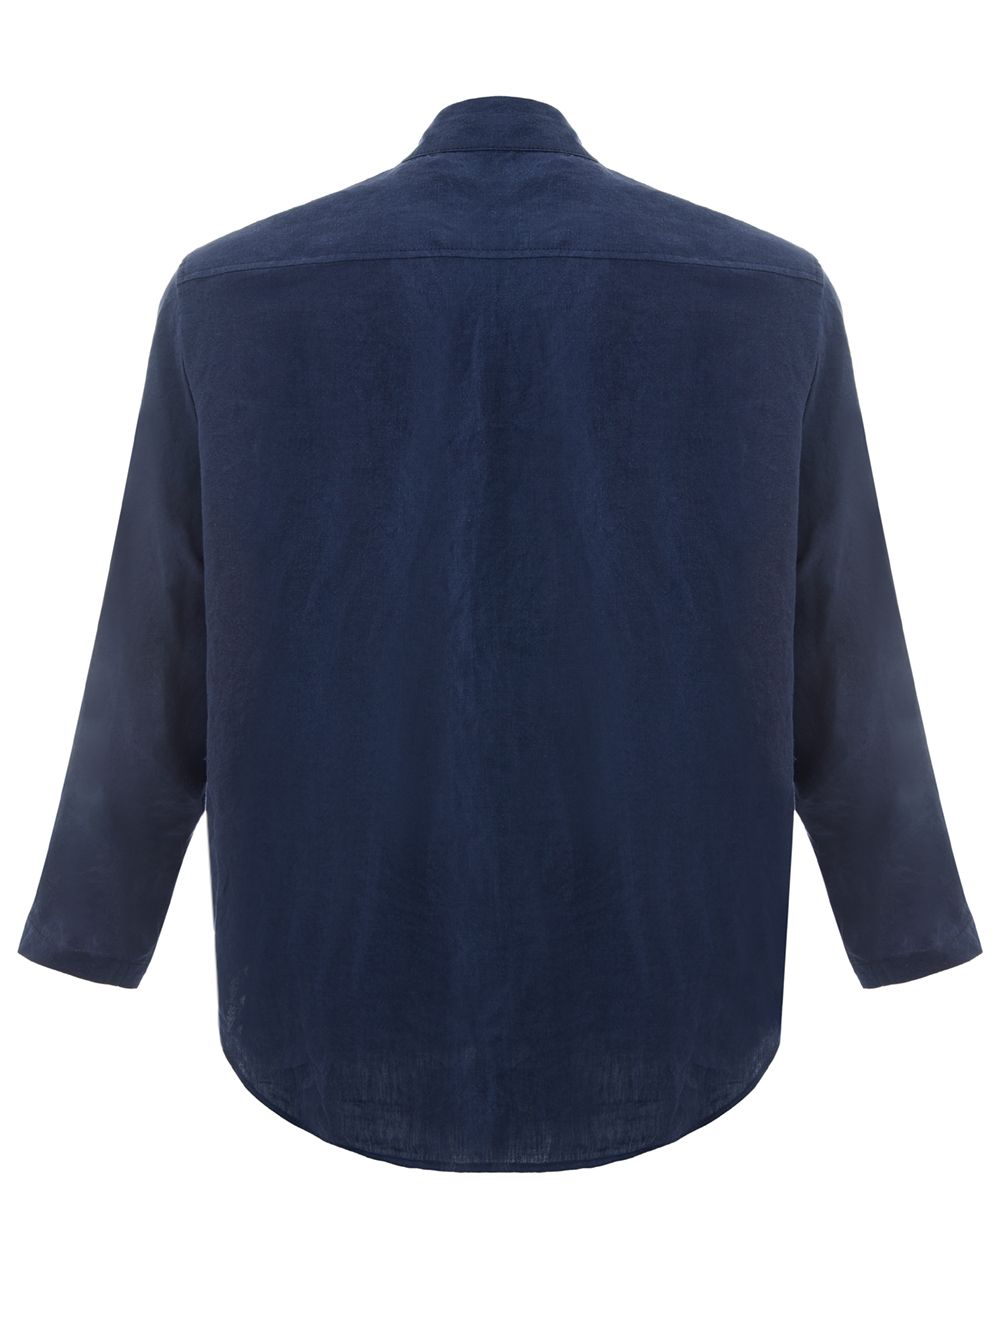 Relaxed Fit Jacket Shirt in Blue Linen